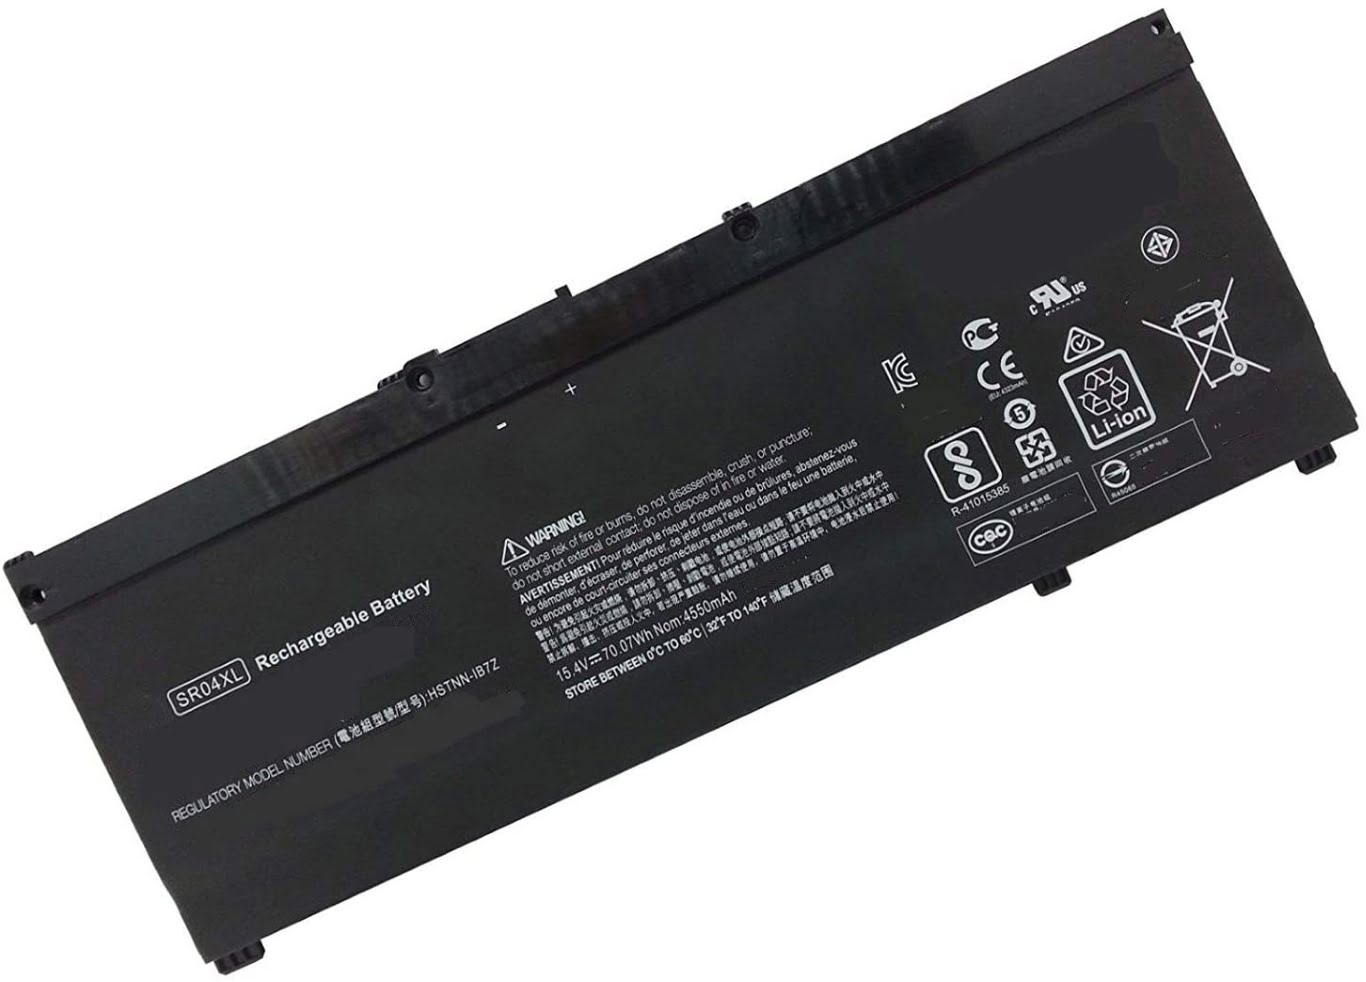 916678-171, 917678-1B1 replacement Laptop Battery for HP 15-CE004TX, 15-CE005TX, 4 cells, 15.4v, 4550mah / 70.07wh